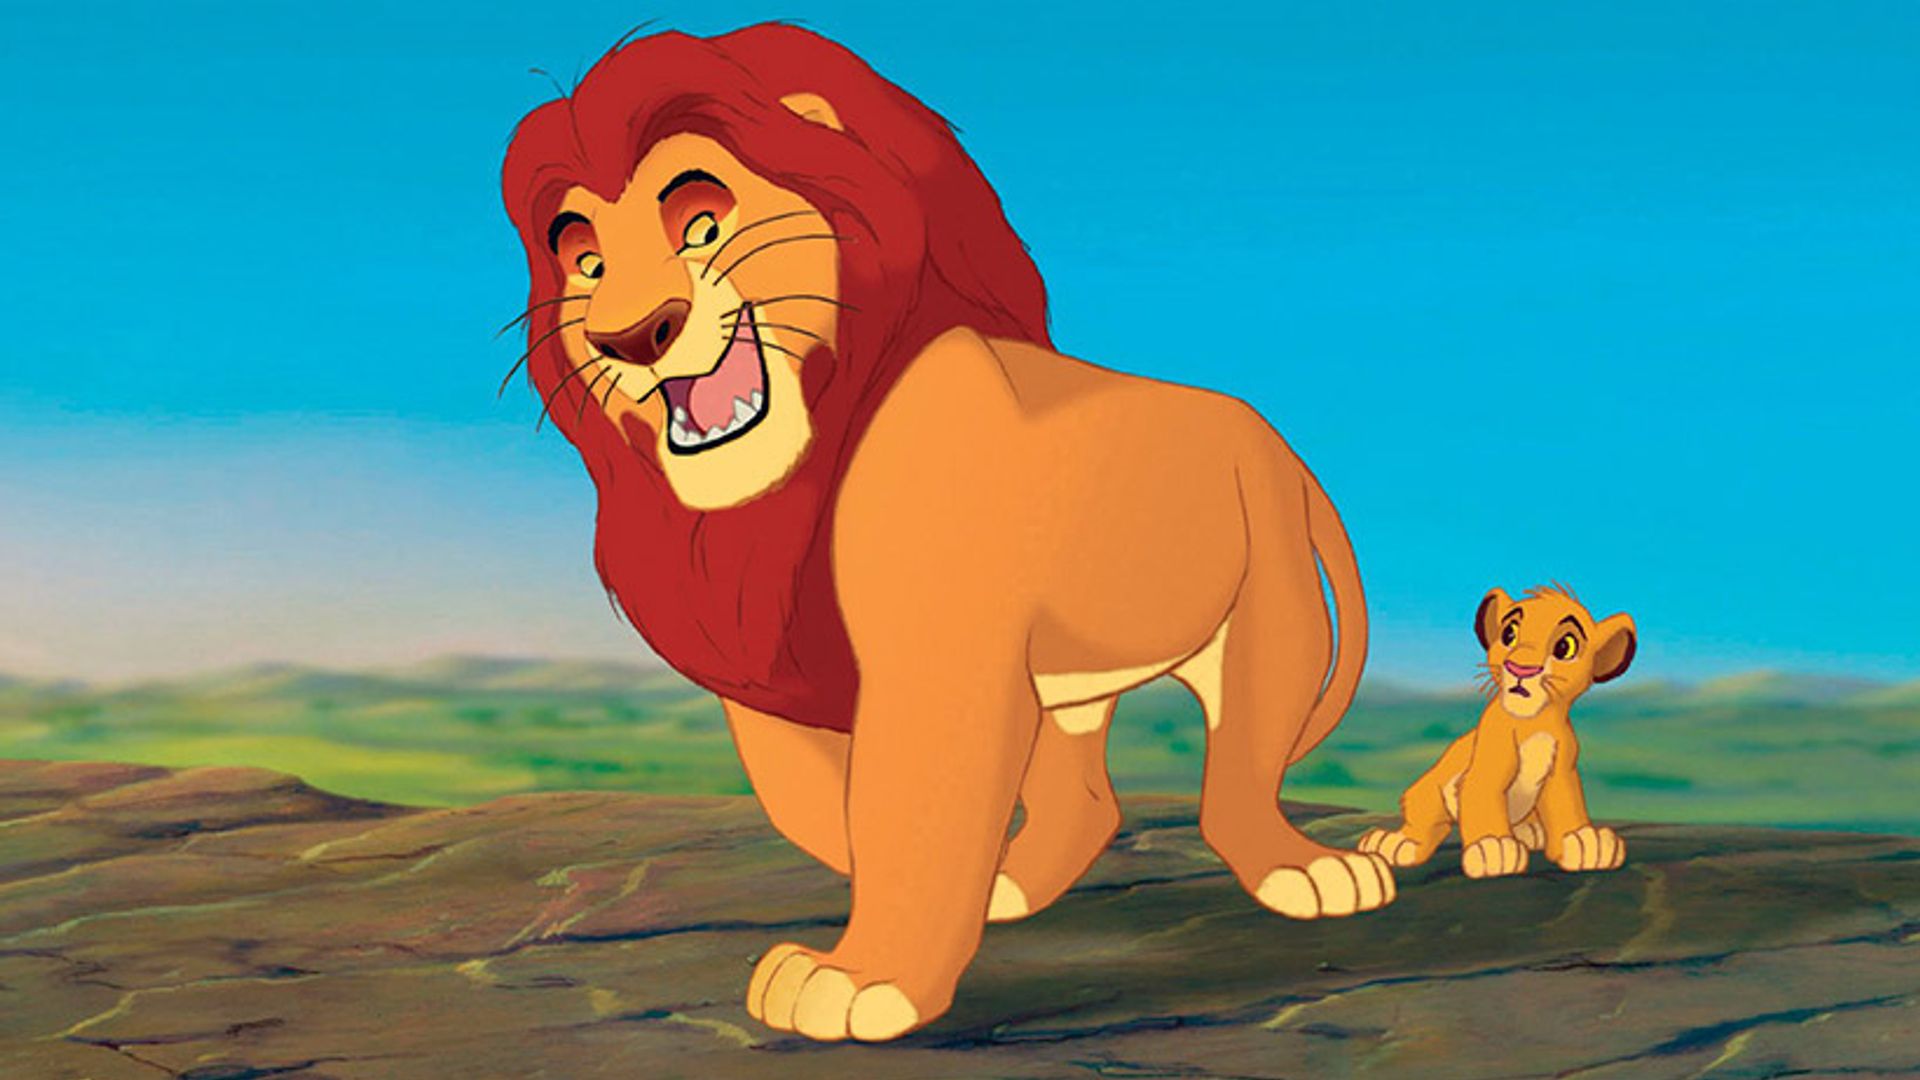 The Lion King remake has been cast – find out who will play Simba!